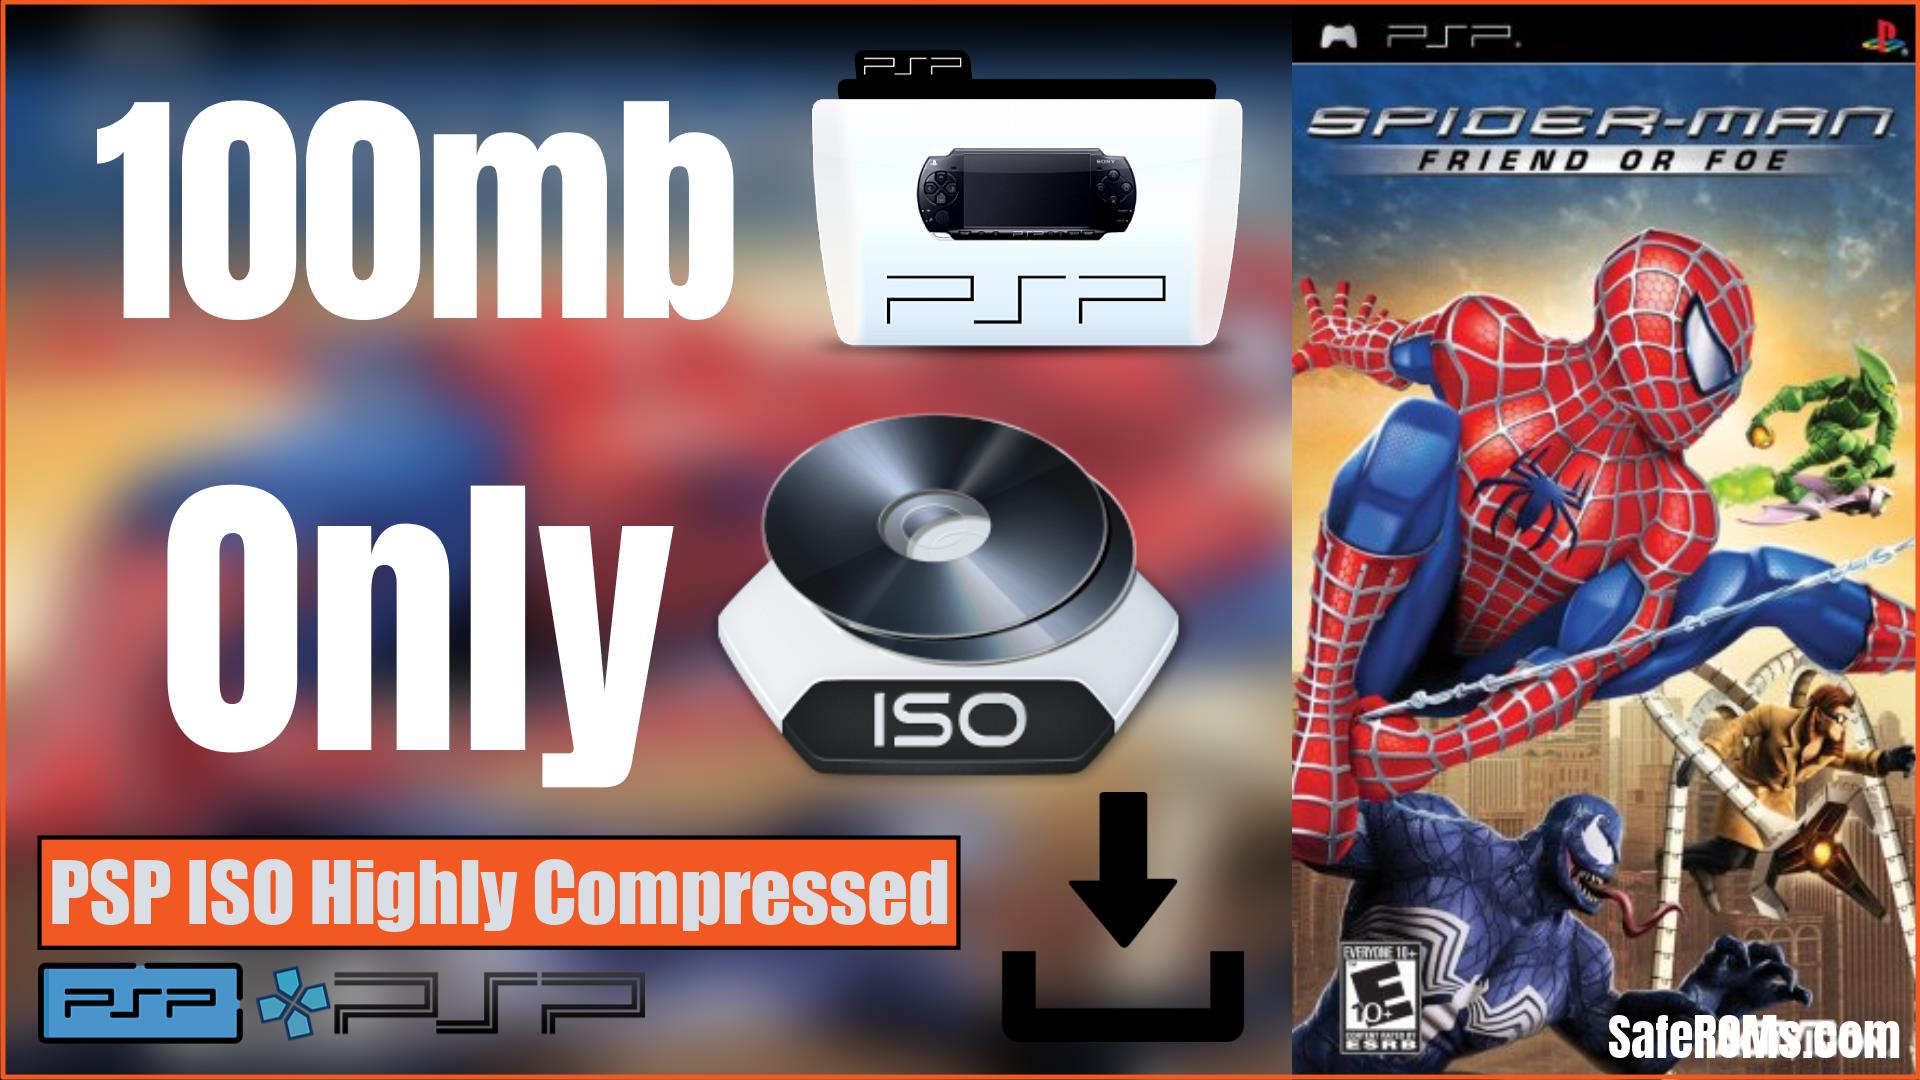 Spider-Man Friend or Foe (100mb) PSP ISO Highly Compressed Download